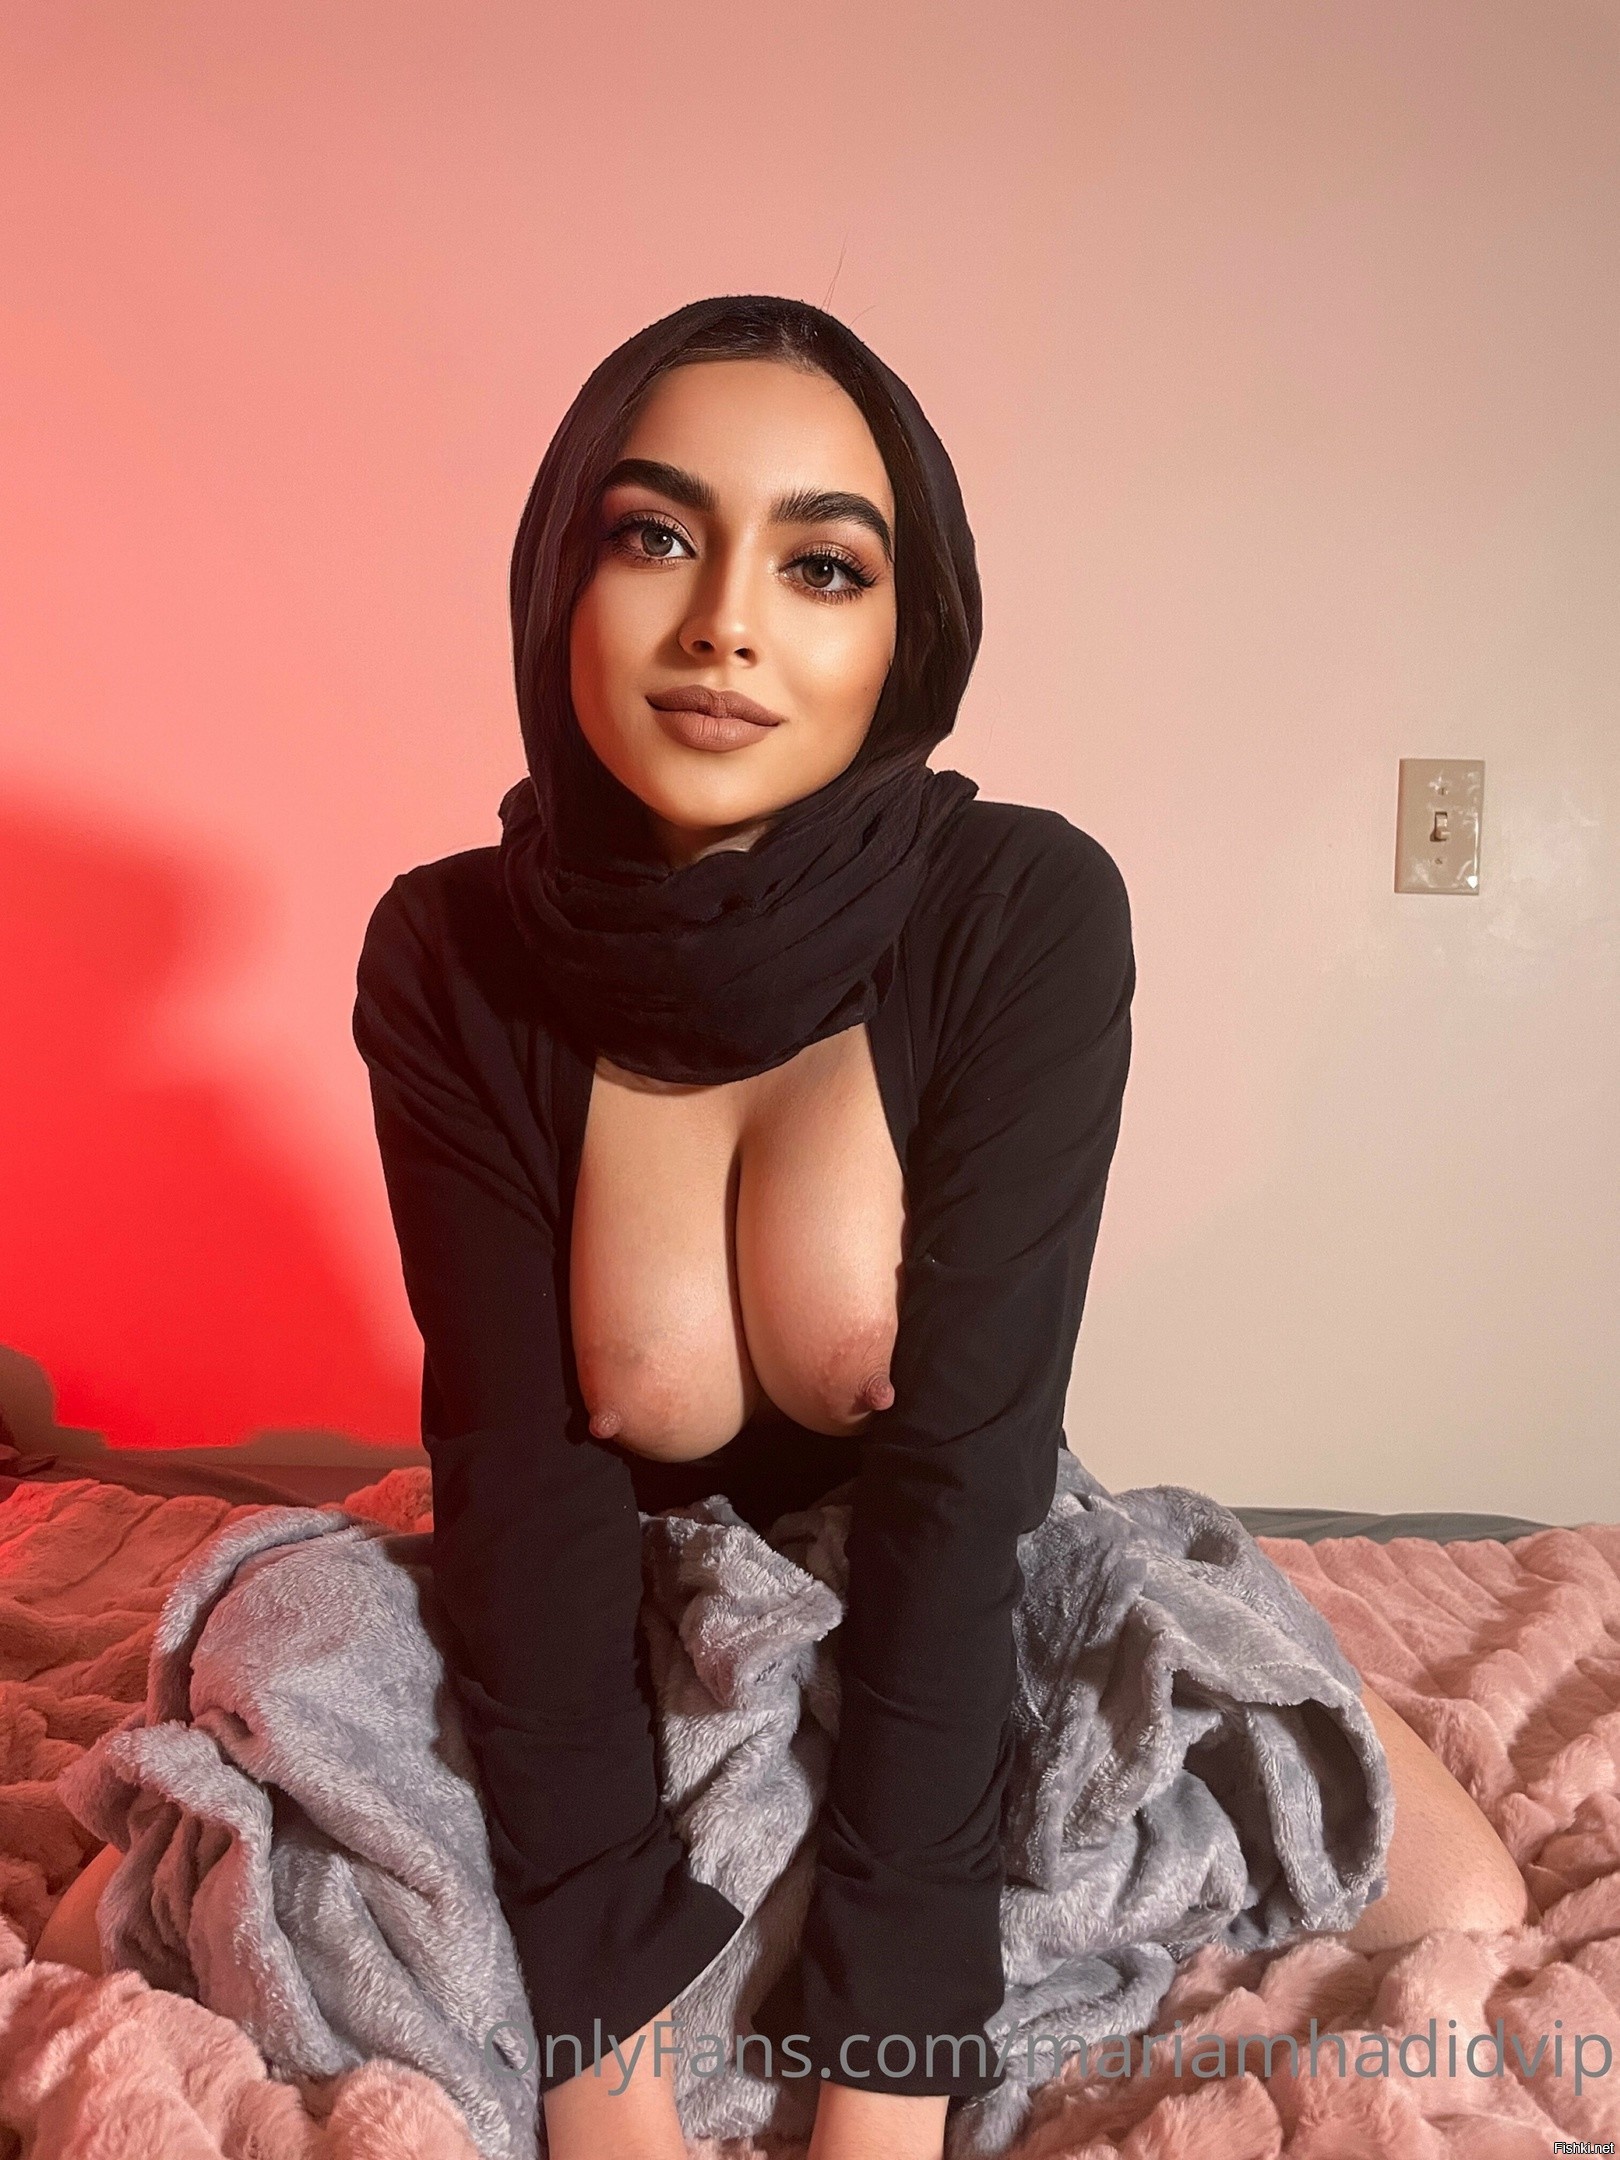 Mariam hadid onlyfans video leaked